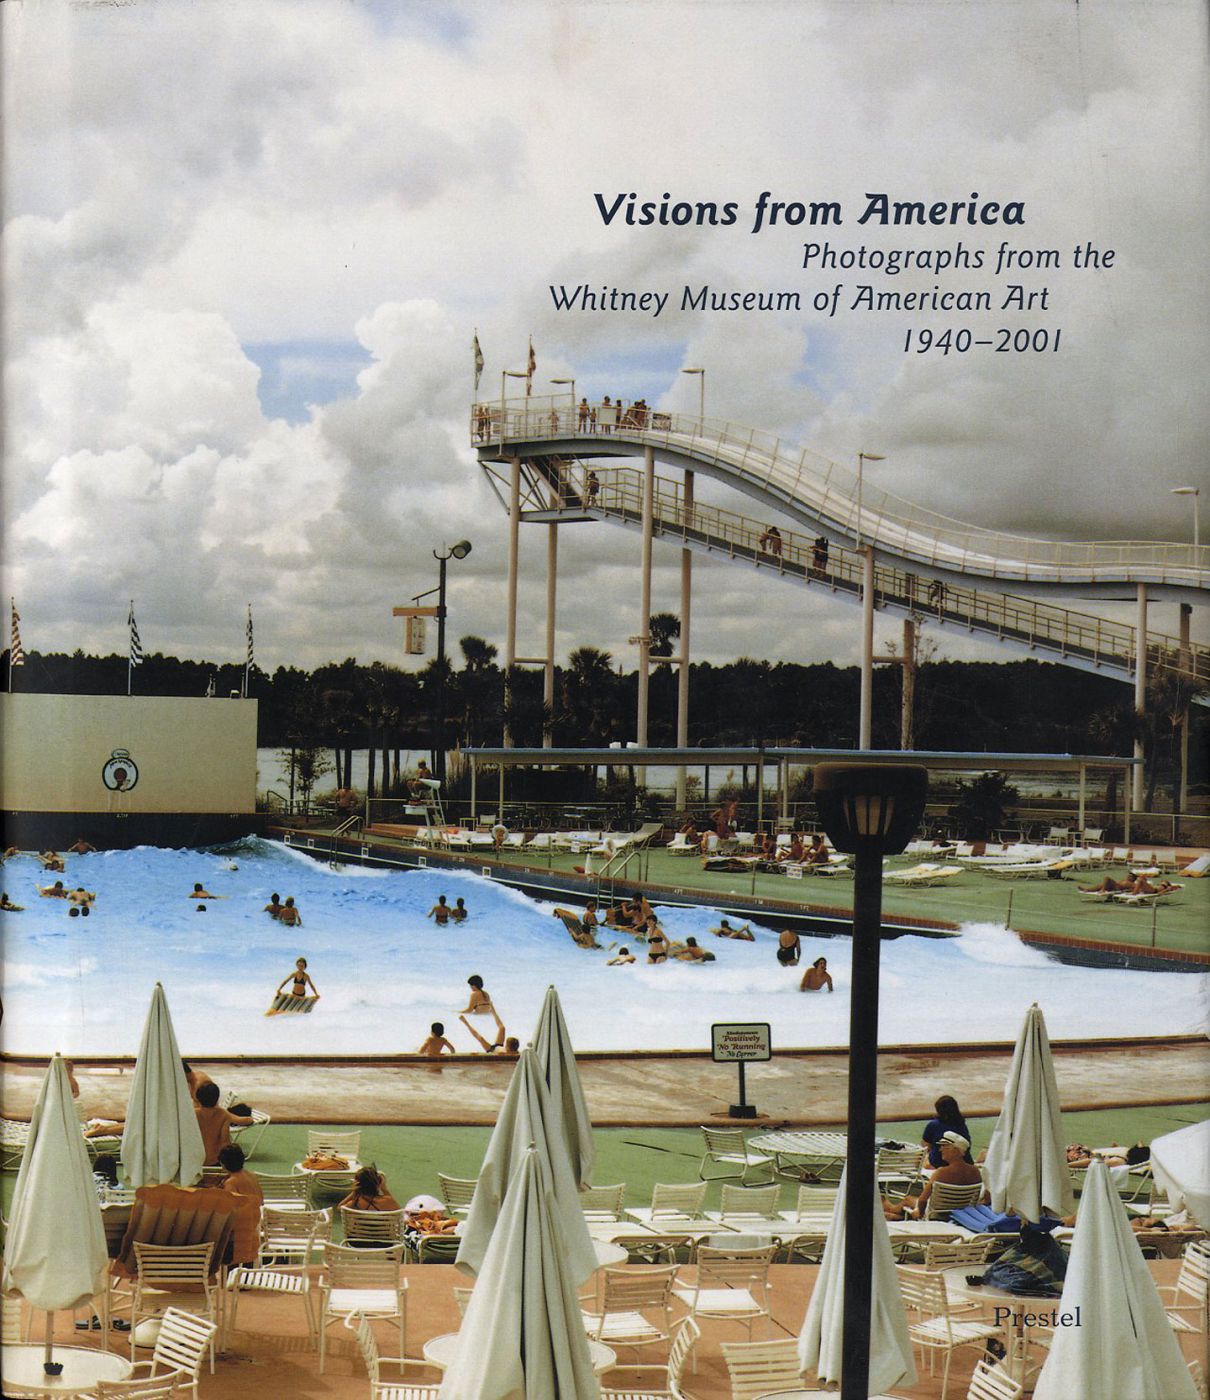 Visions from America: Photographs from the Whitney Museum of American Art 1940-2001